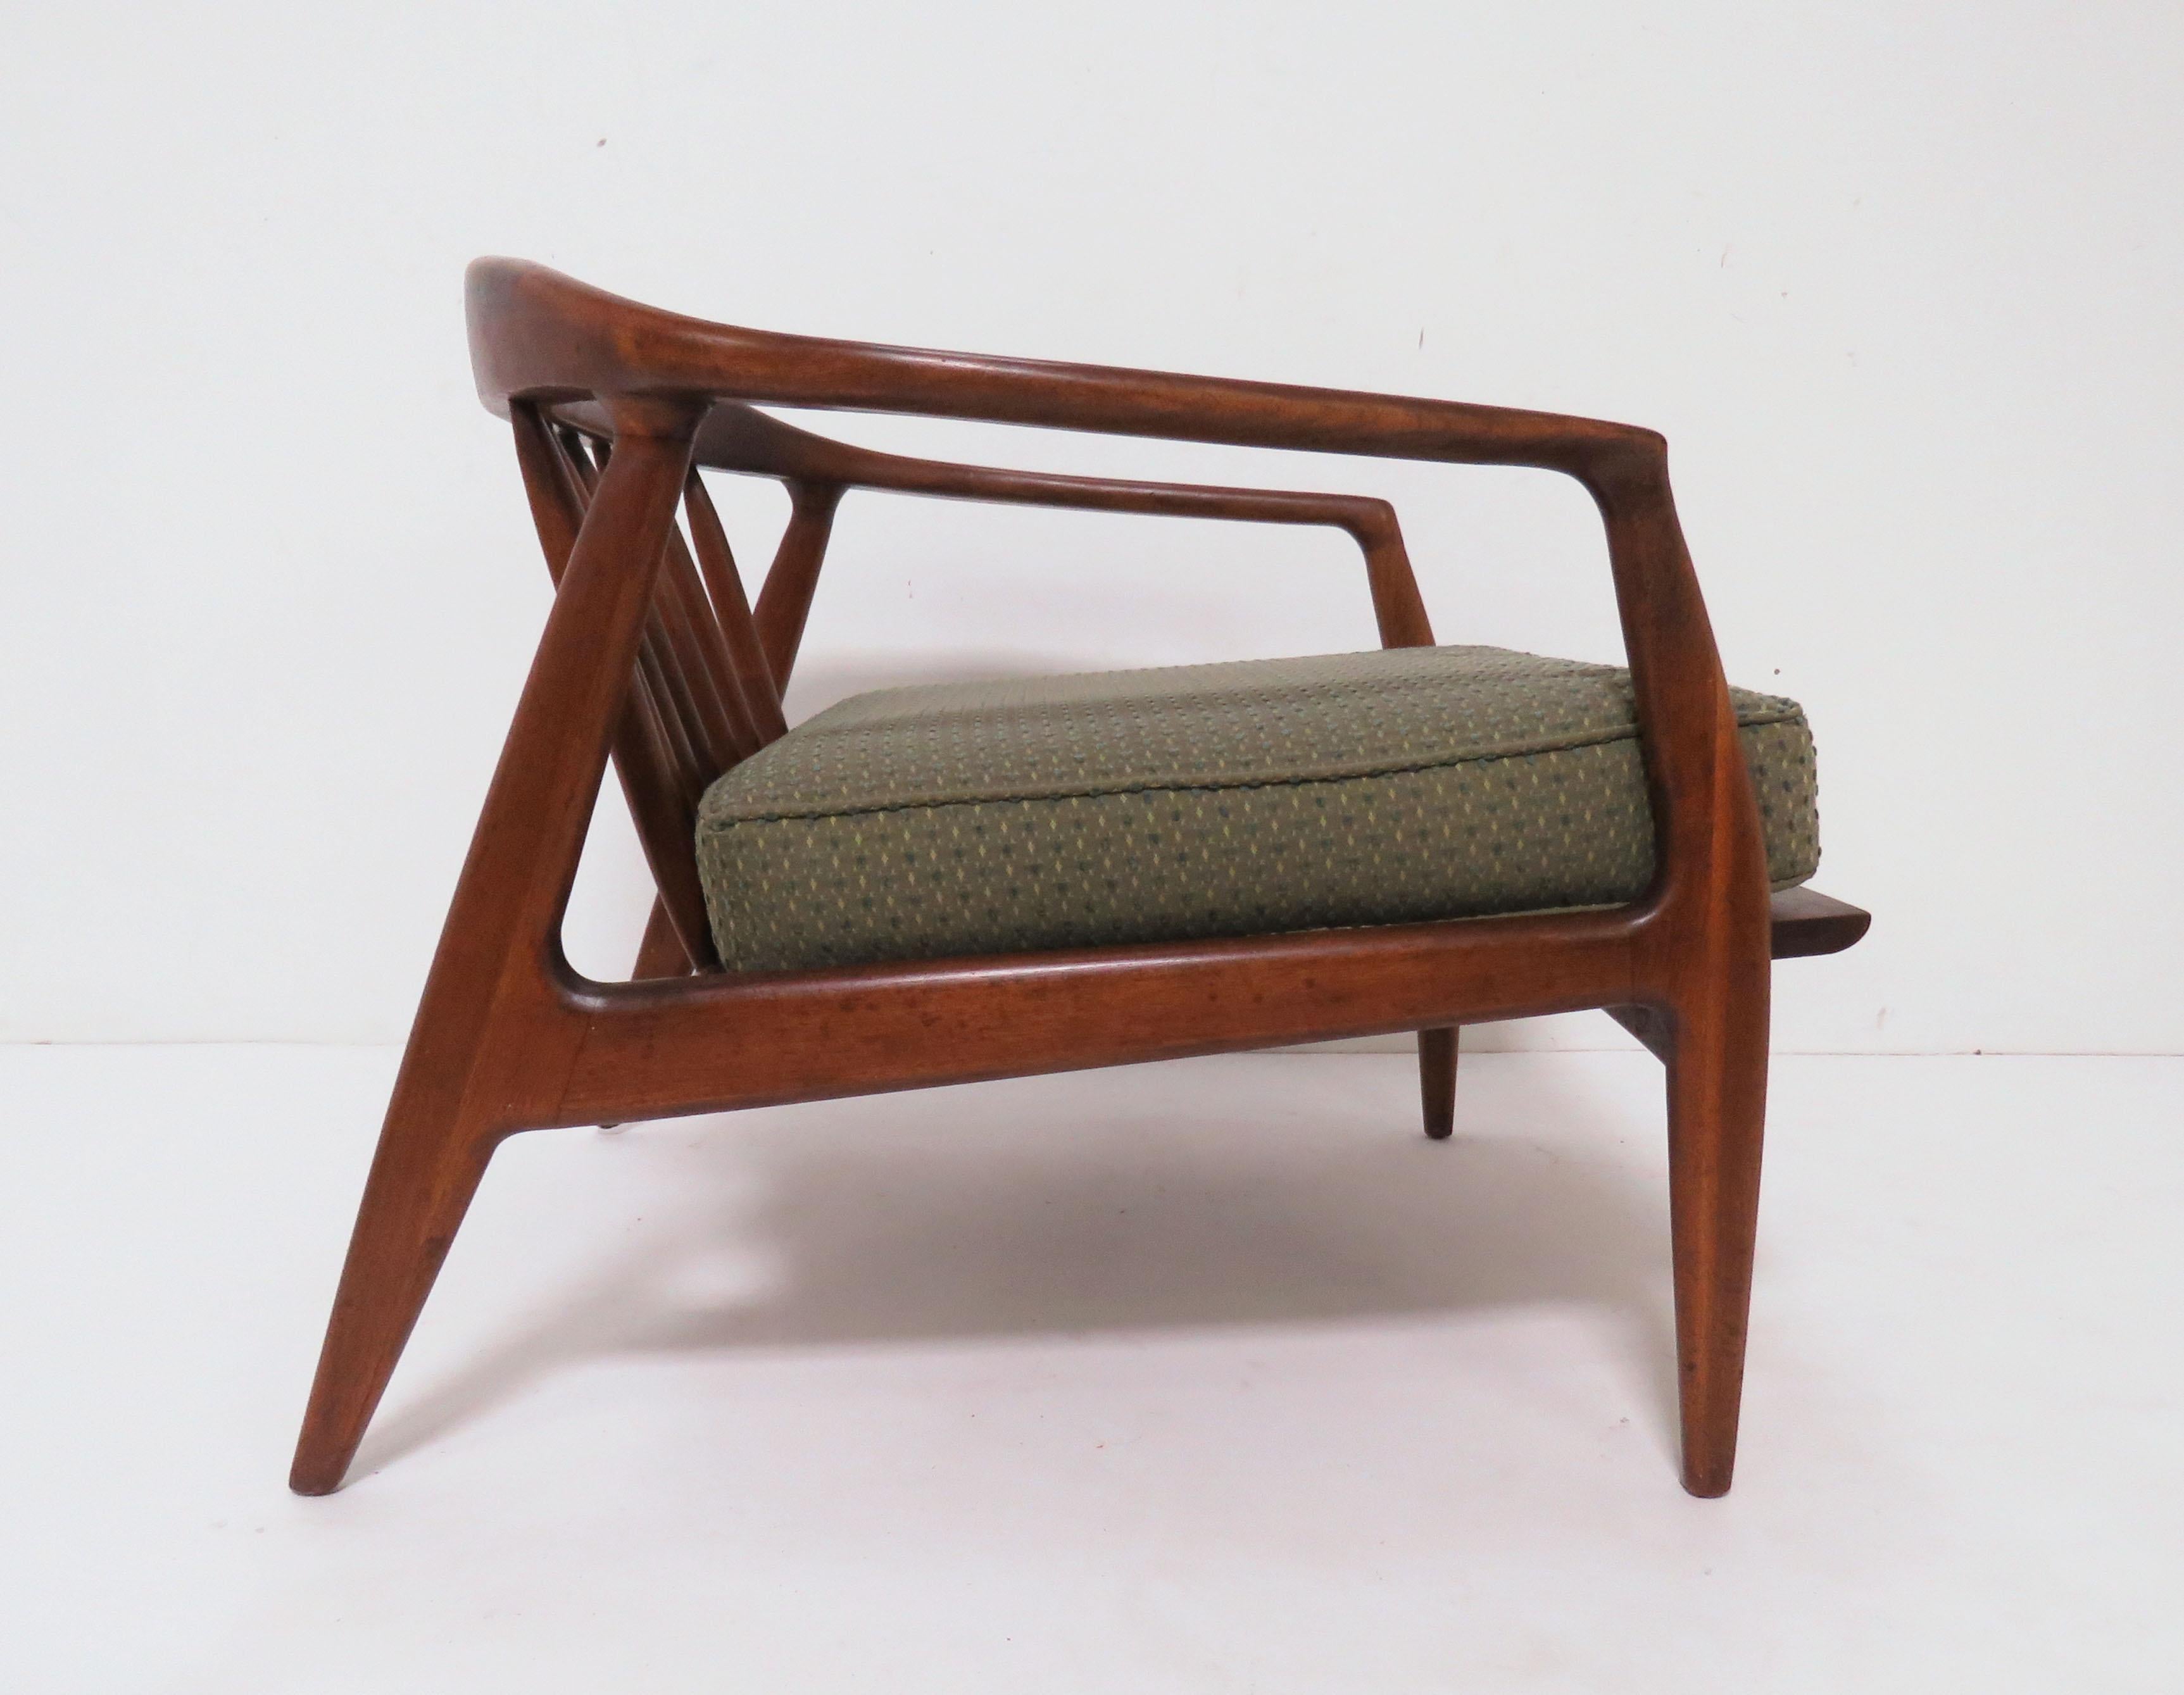 Lounge chair in solid walnut with a spindled barrel back designed by Milo Baughman for Thayer Coggin, circa 1950s.